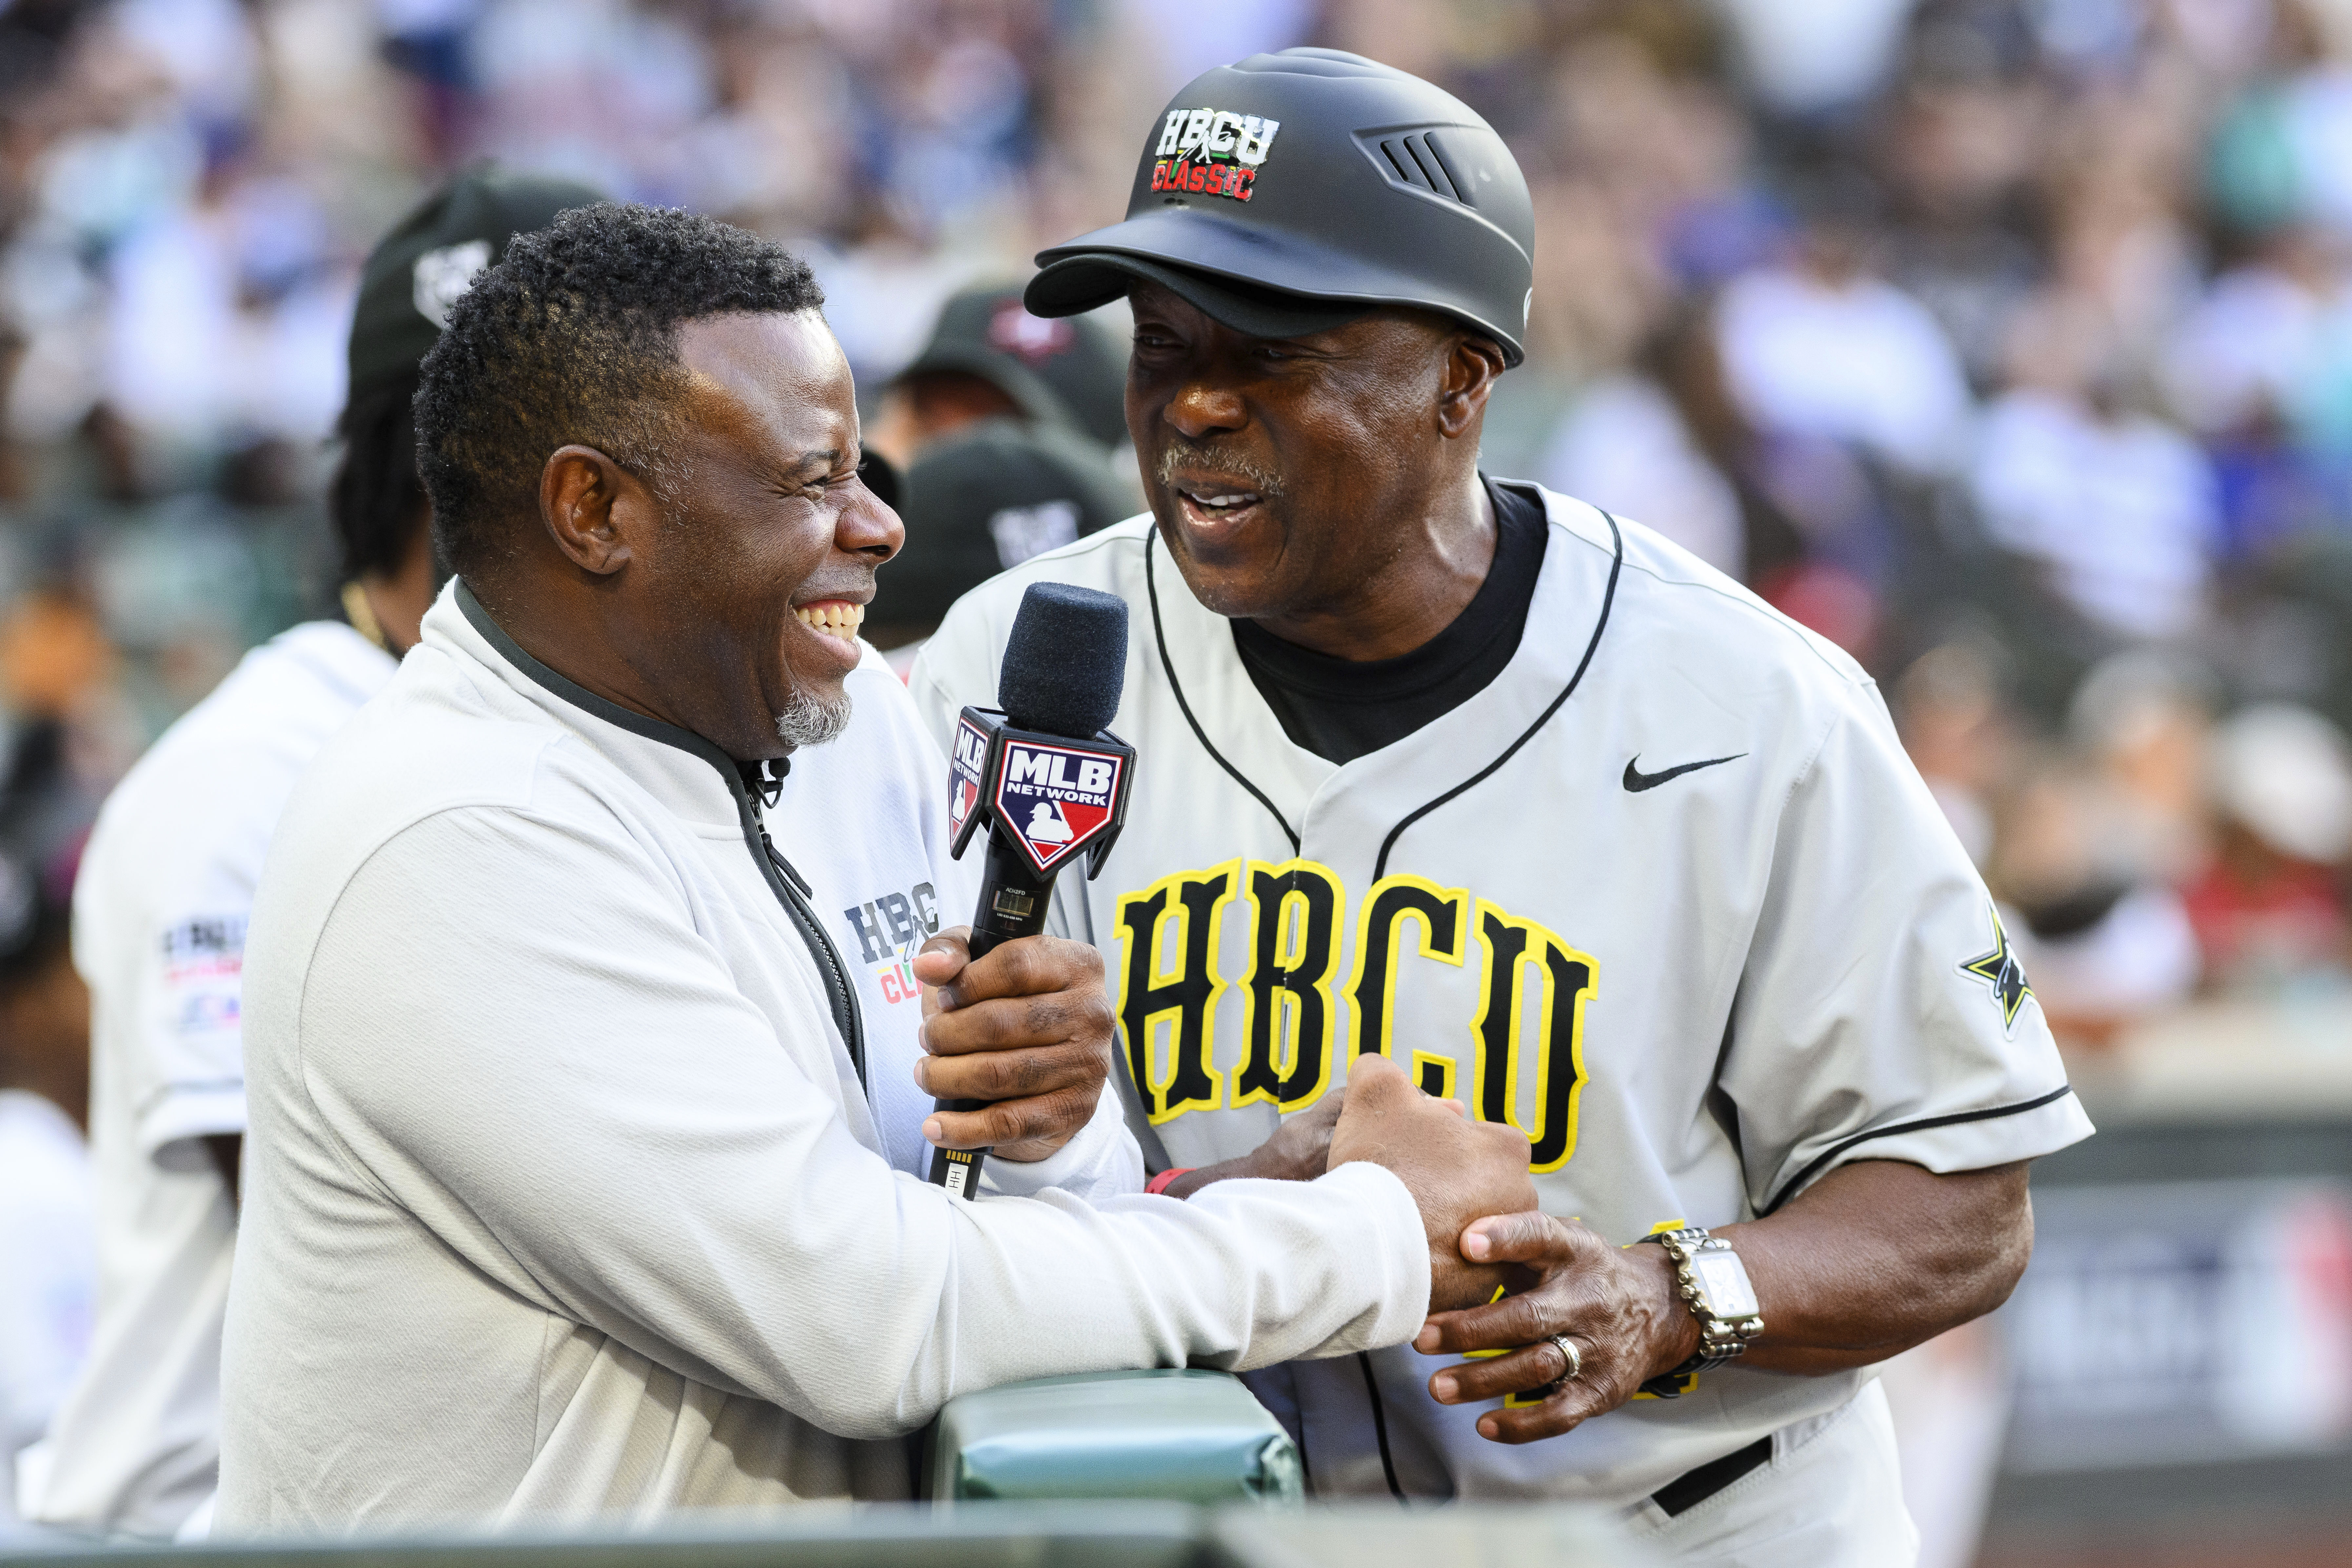 MLB - The Kid talks to the kids. Ken Griffey Jr. made an appearance at the Hank  Aaron Invitational, a development event that aims to get high school-age  players with diverse backgrounds